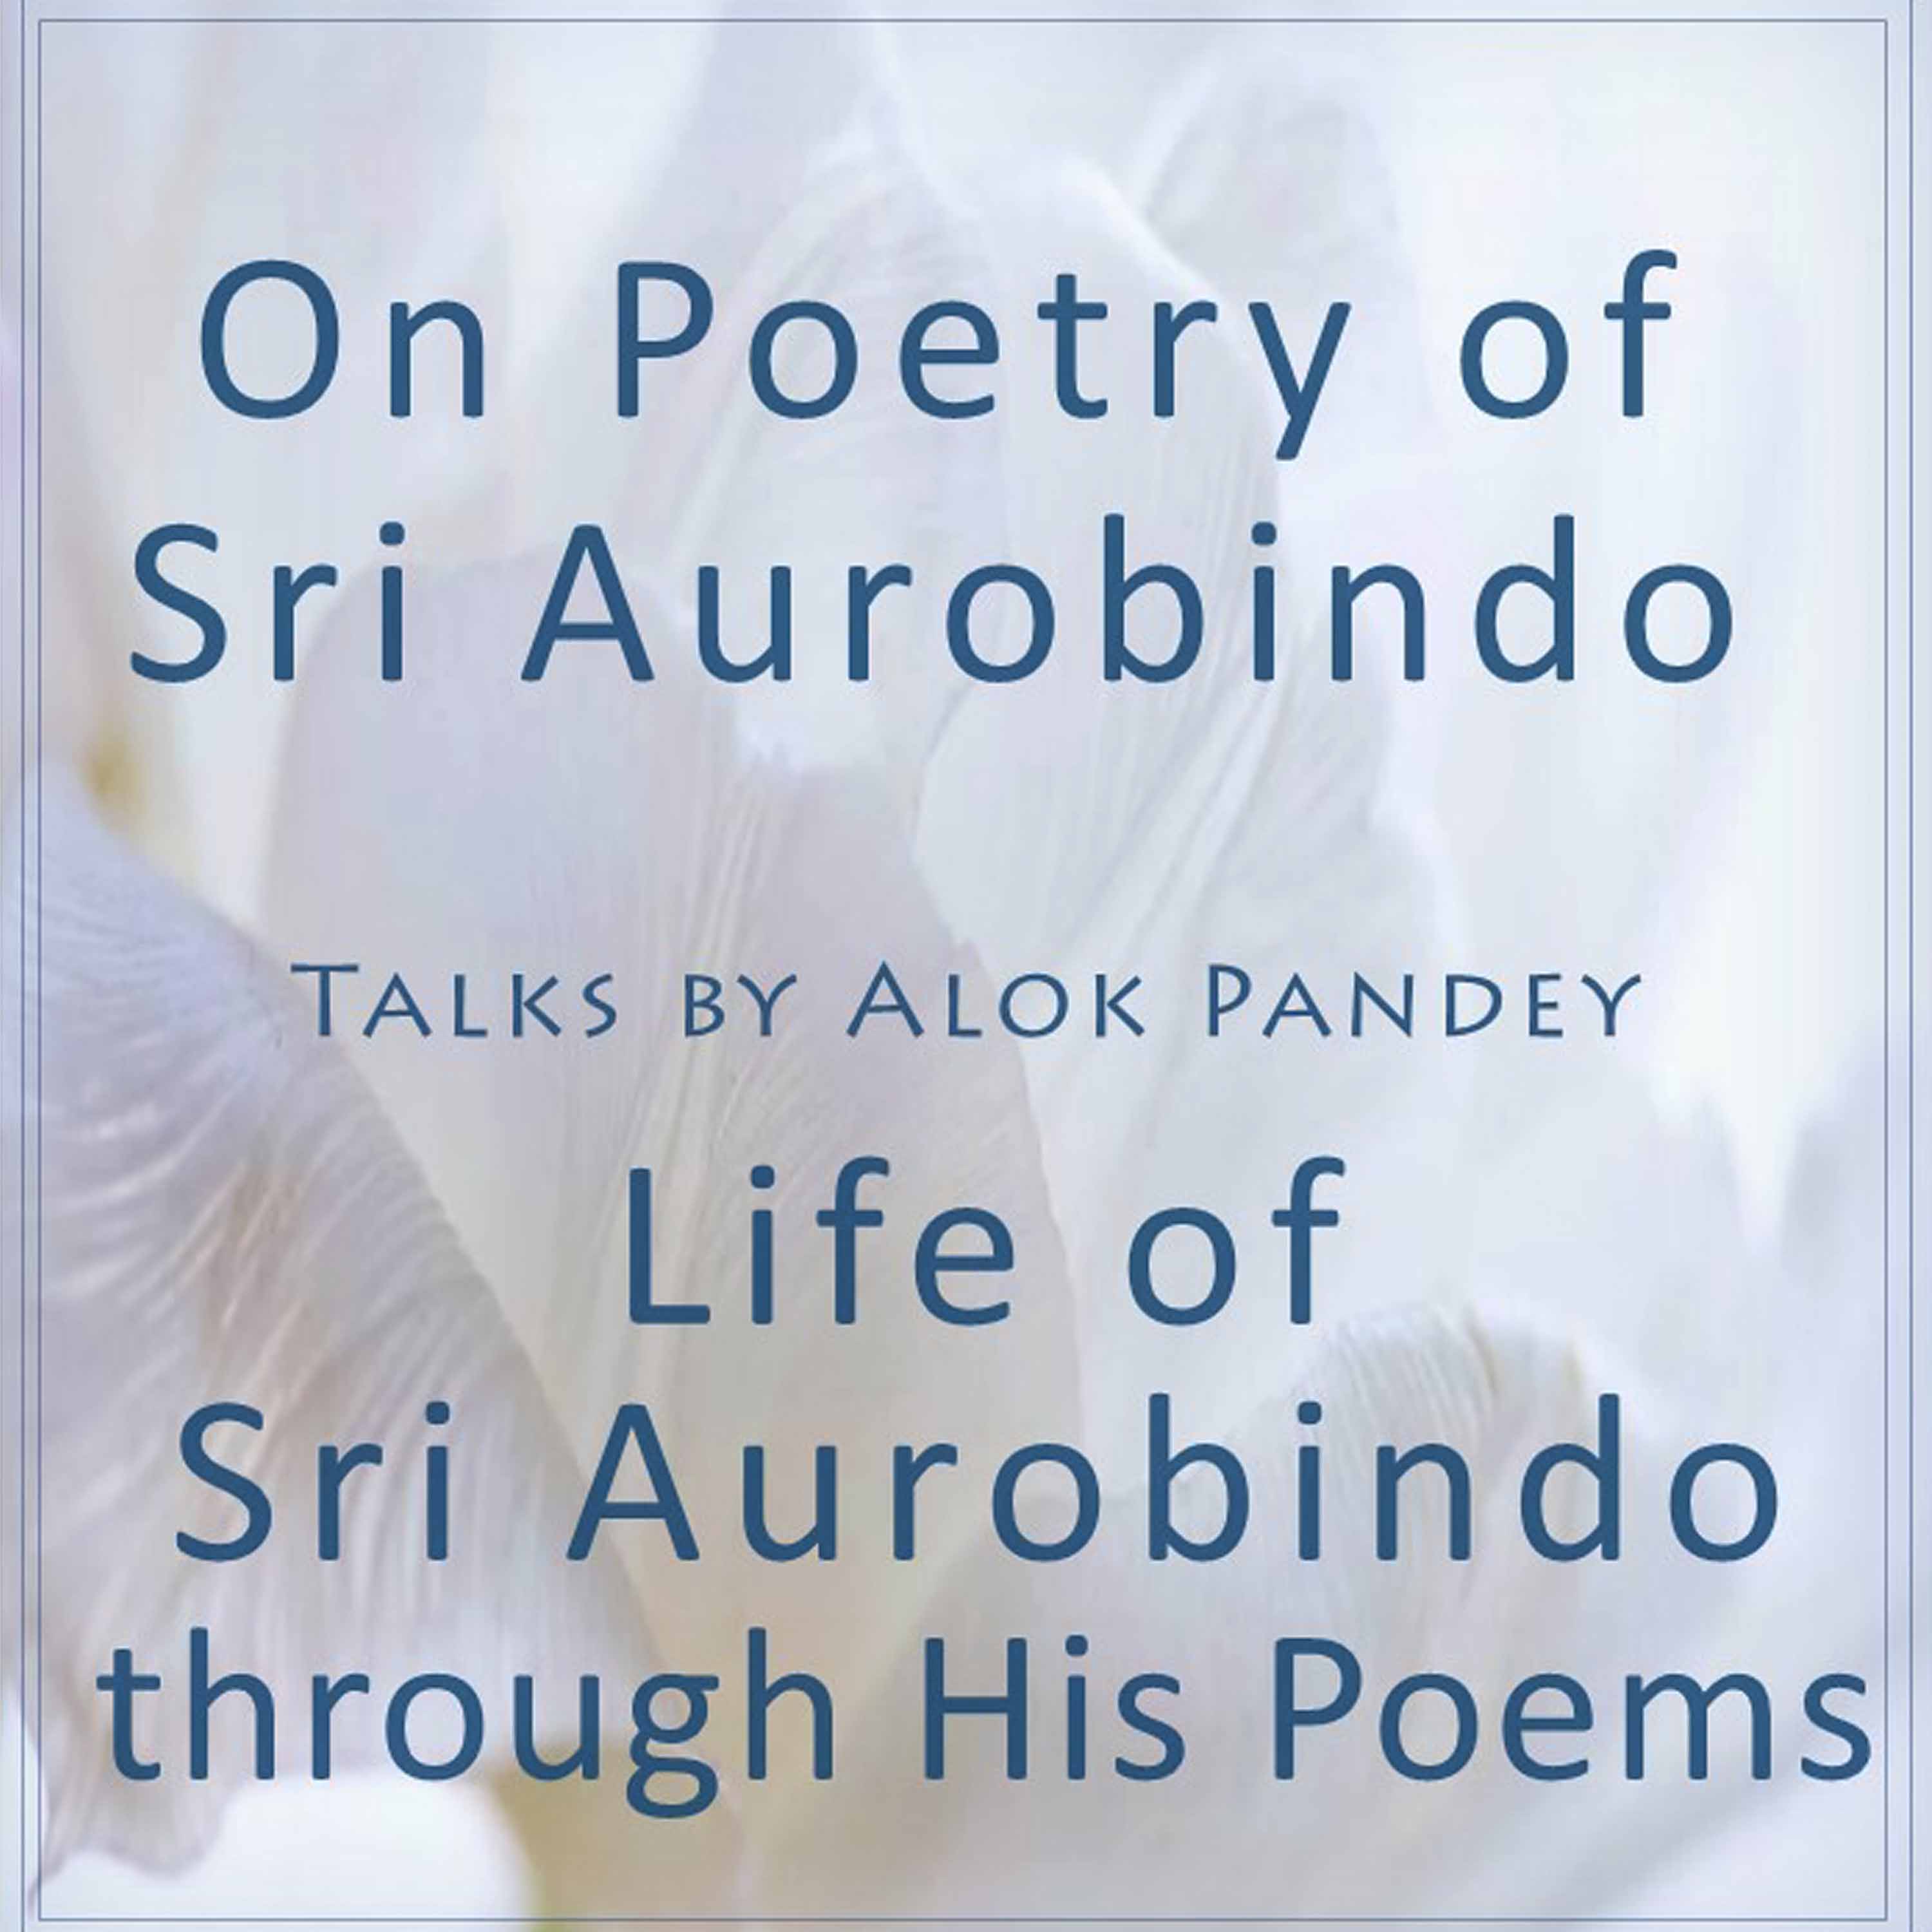 Reflections on Sri Aurobindo’s Poetry